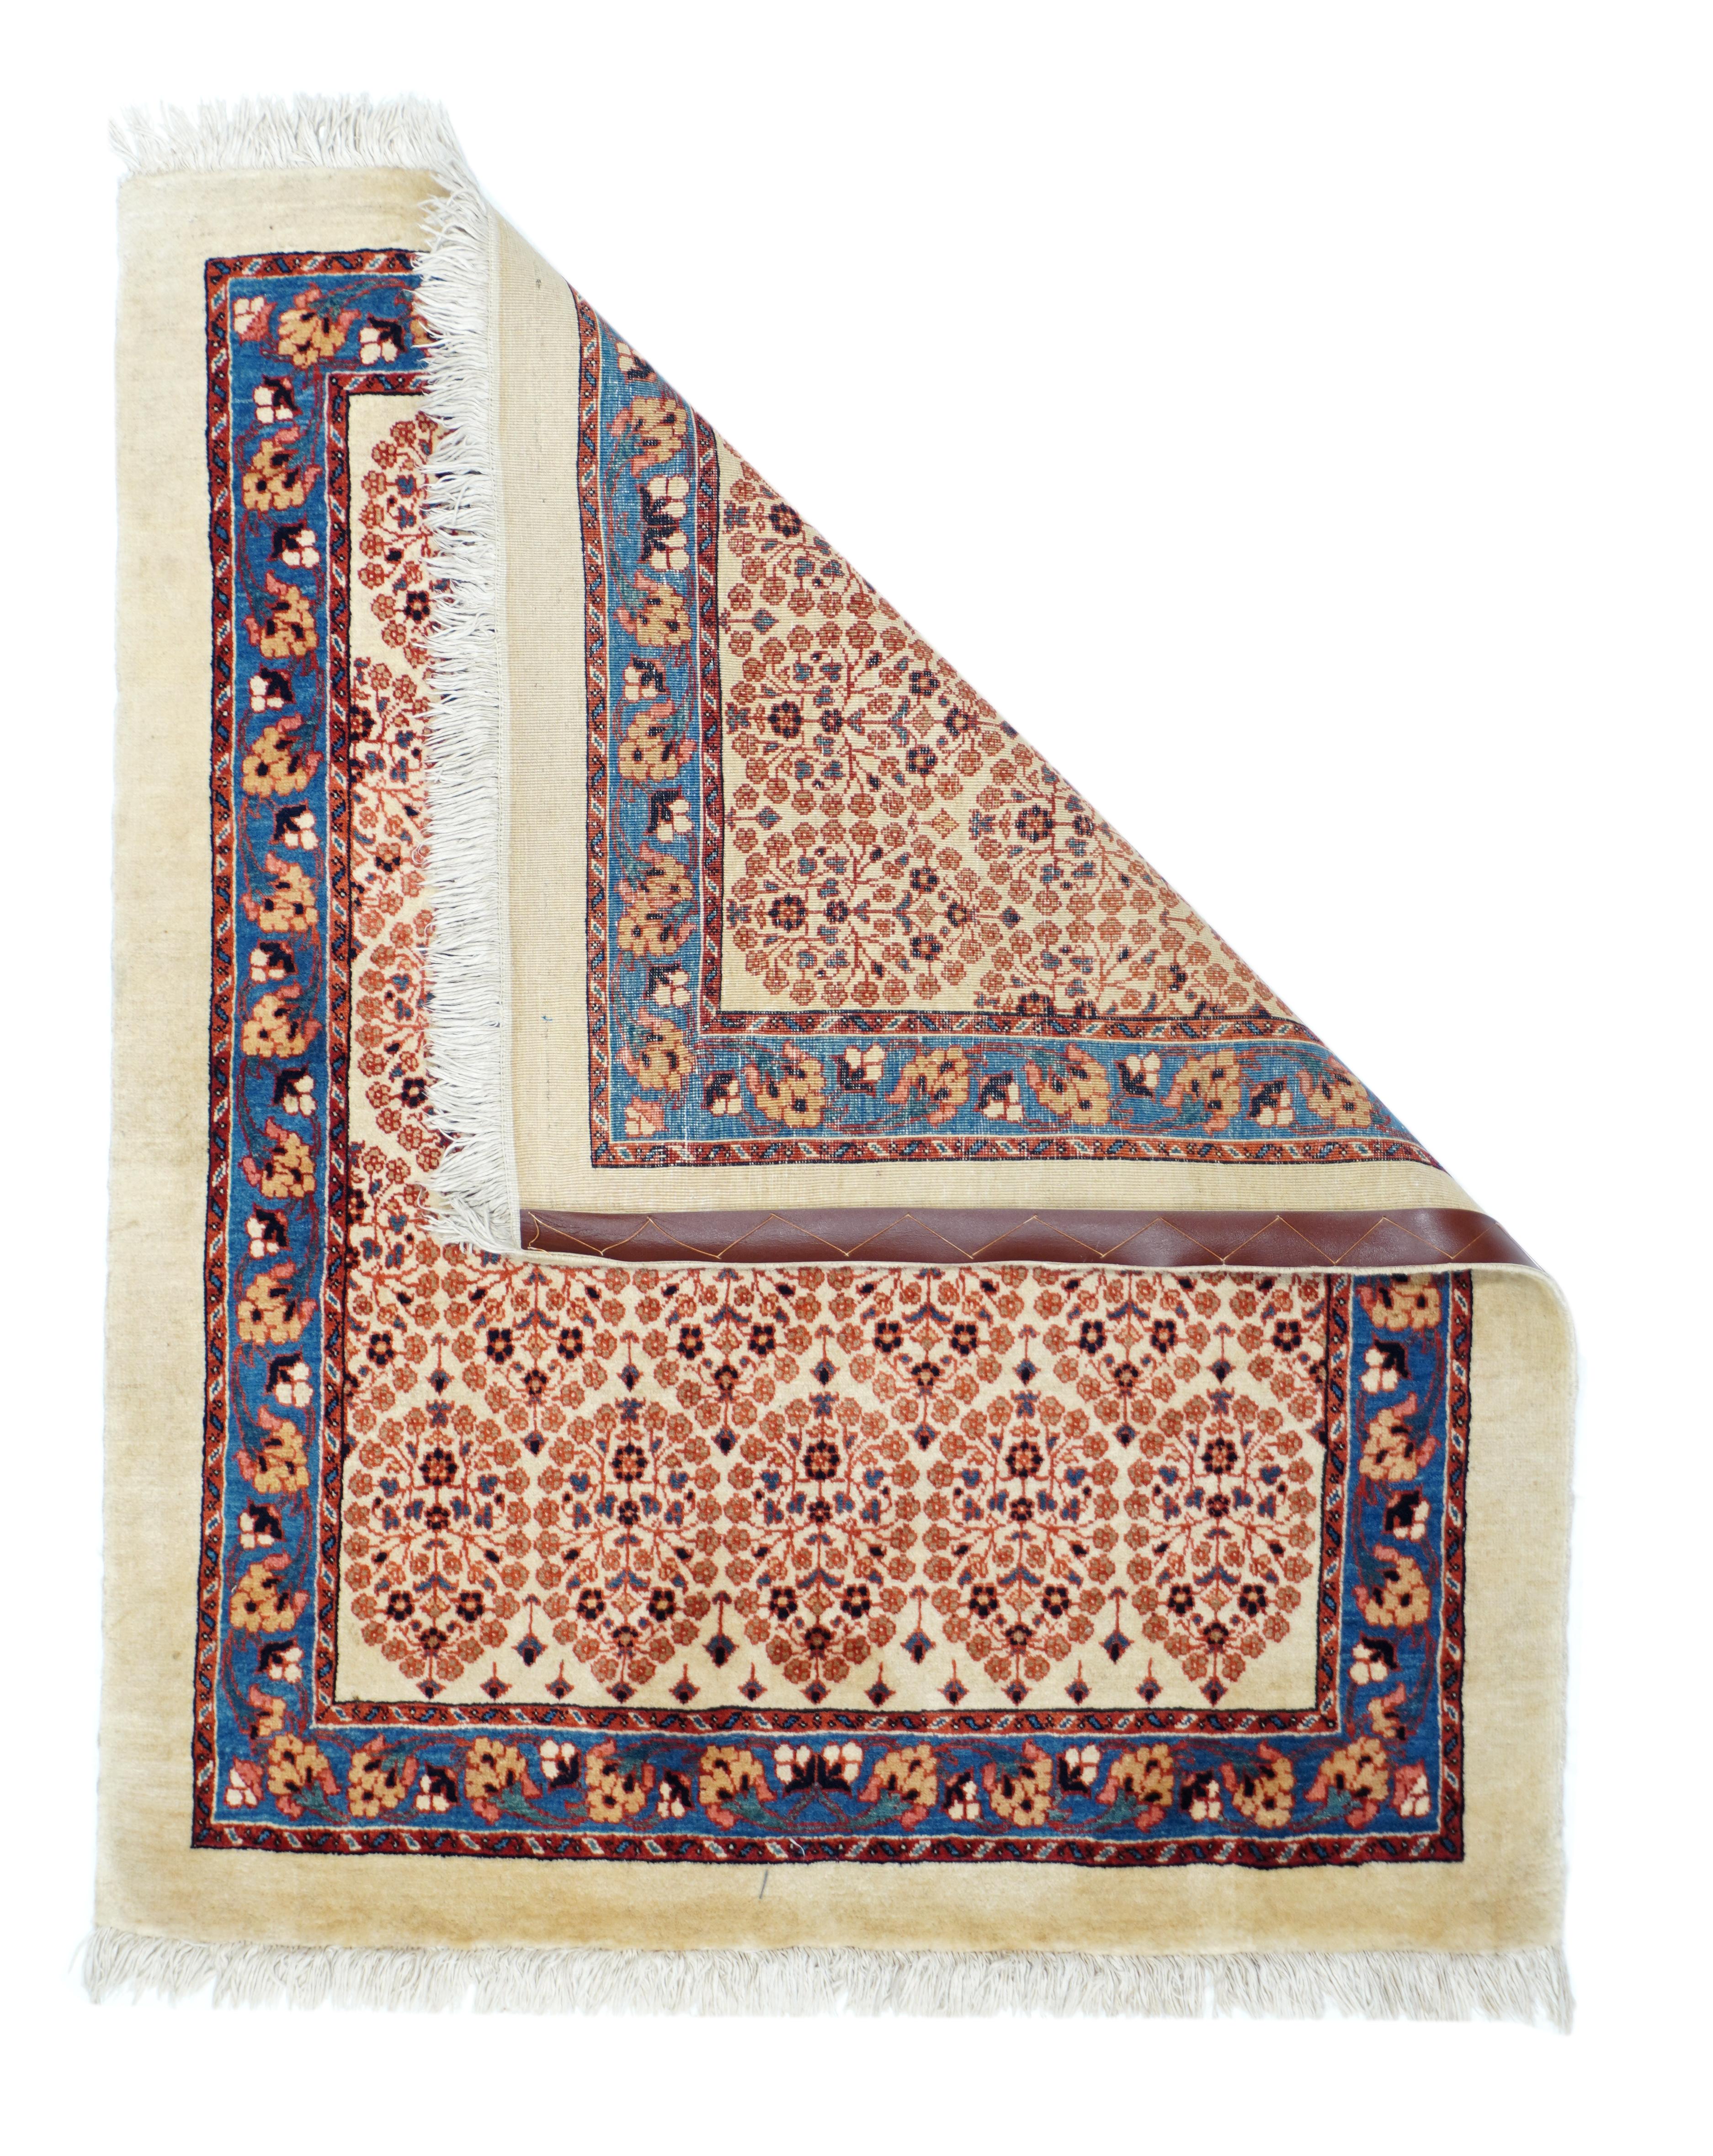 Antique Bidjar rug 3' x 3'4''. On a creamy sand ground are set five offset rows of oval, open floral motives accented in chocolate, dark blue and salmon-rose. Plain milky camel outer surround and medium-blue main border with two types of flowers.